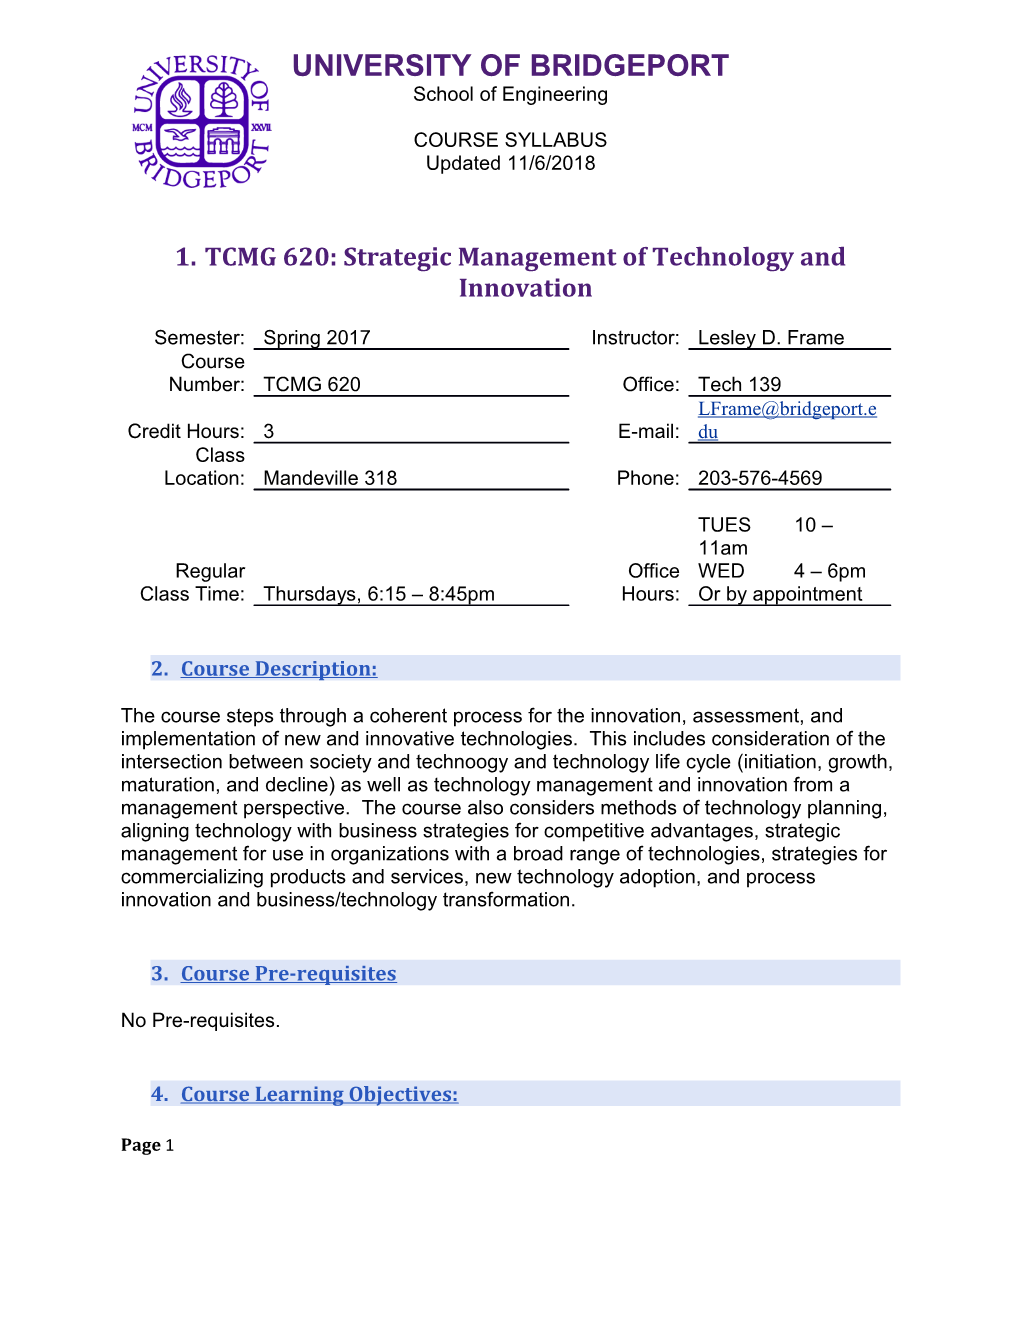 TCMG 620: Strategic Management of Technology and Innovation